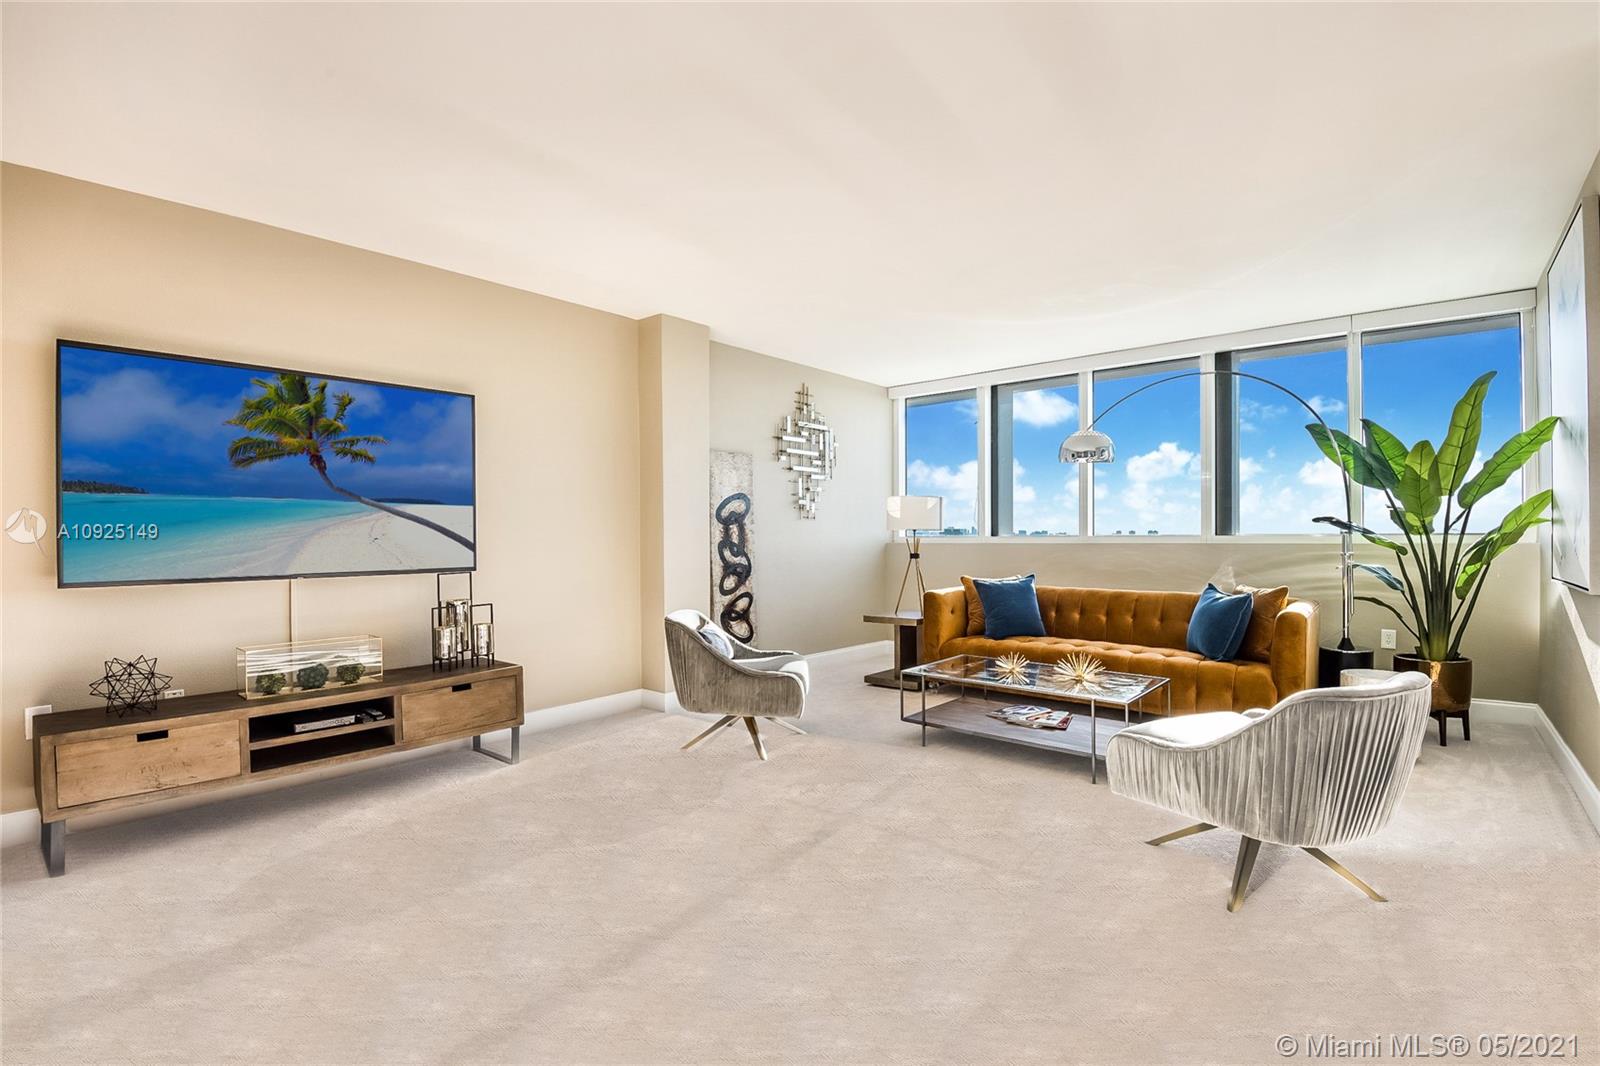 Photo 1 of Harbour House Apt 1530 in Bal Harbour - MLS A10925149